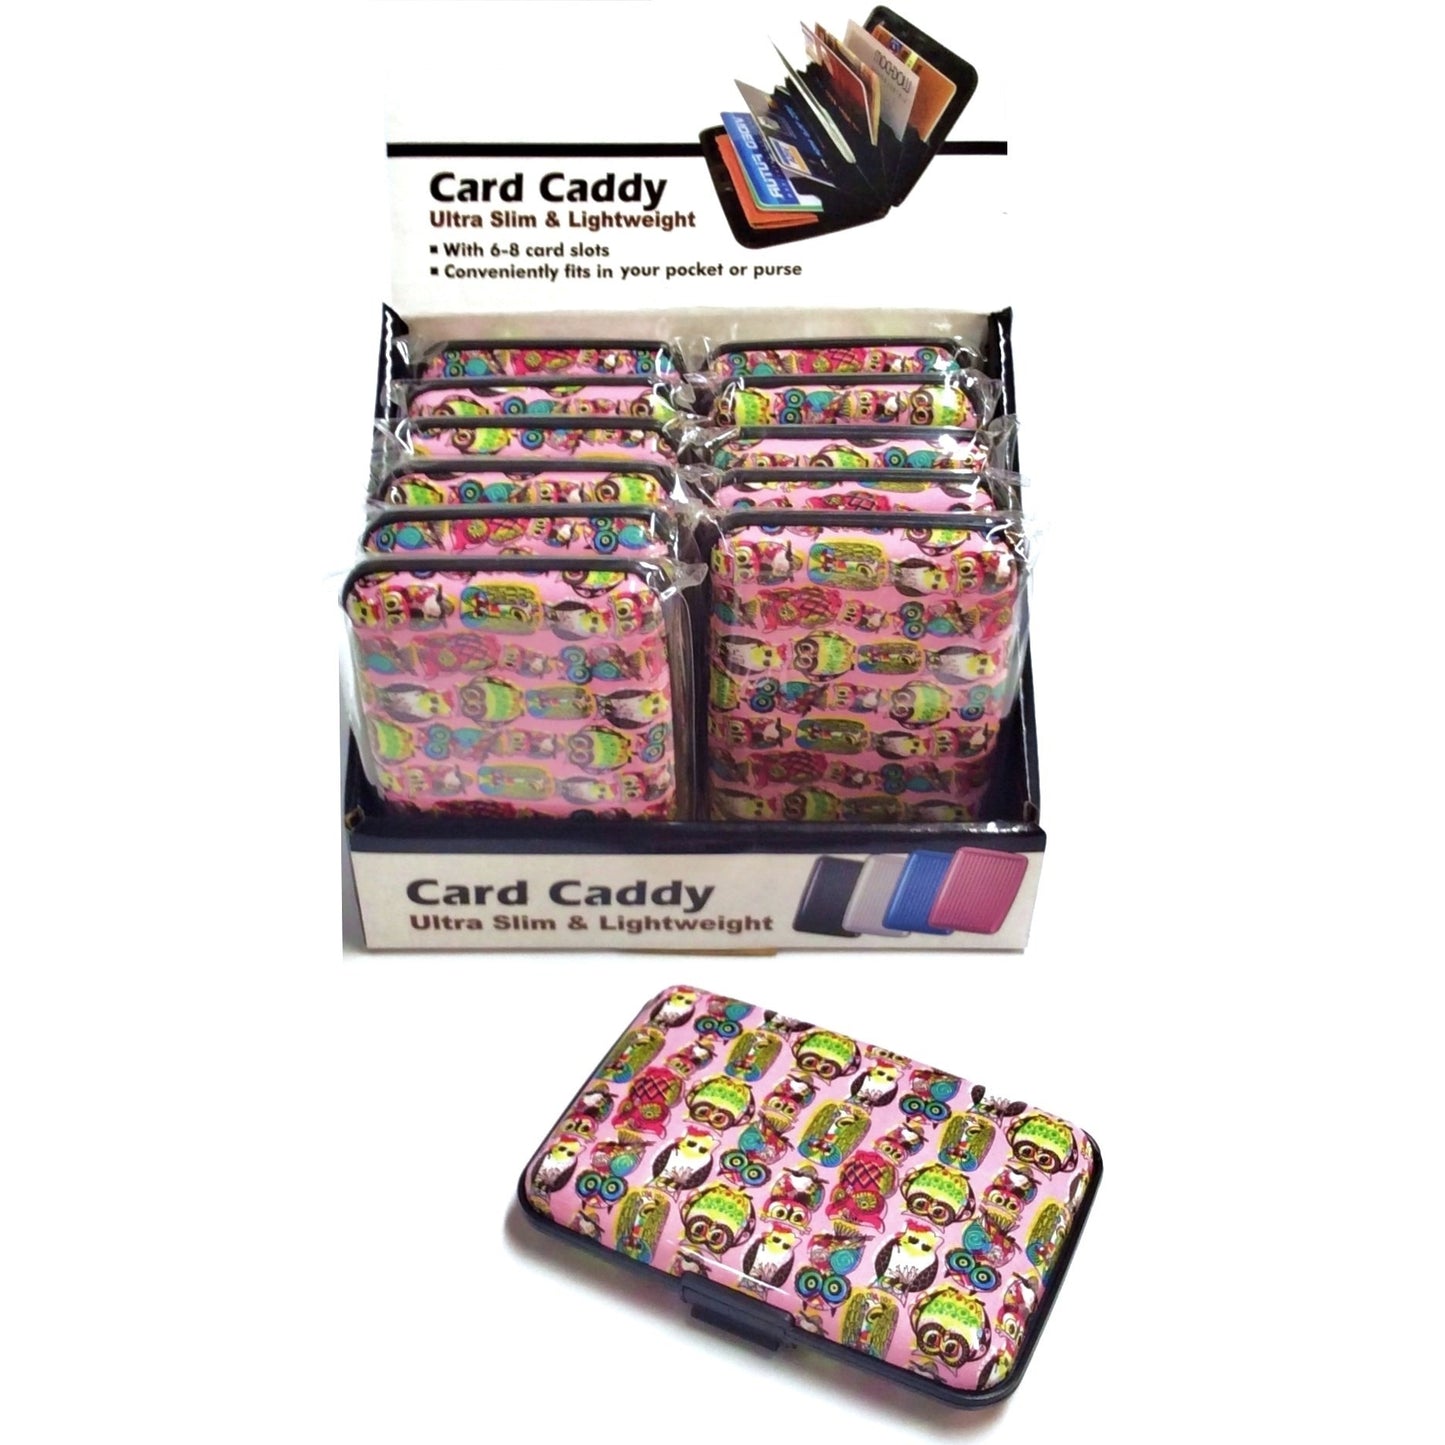 Aluminum Wallets: Case of 12 #65-3261PO (Pink Owl)